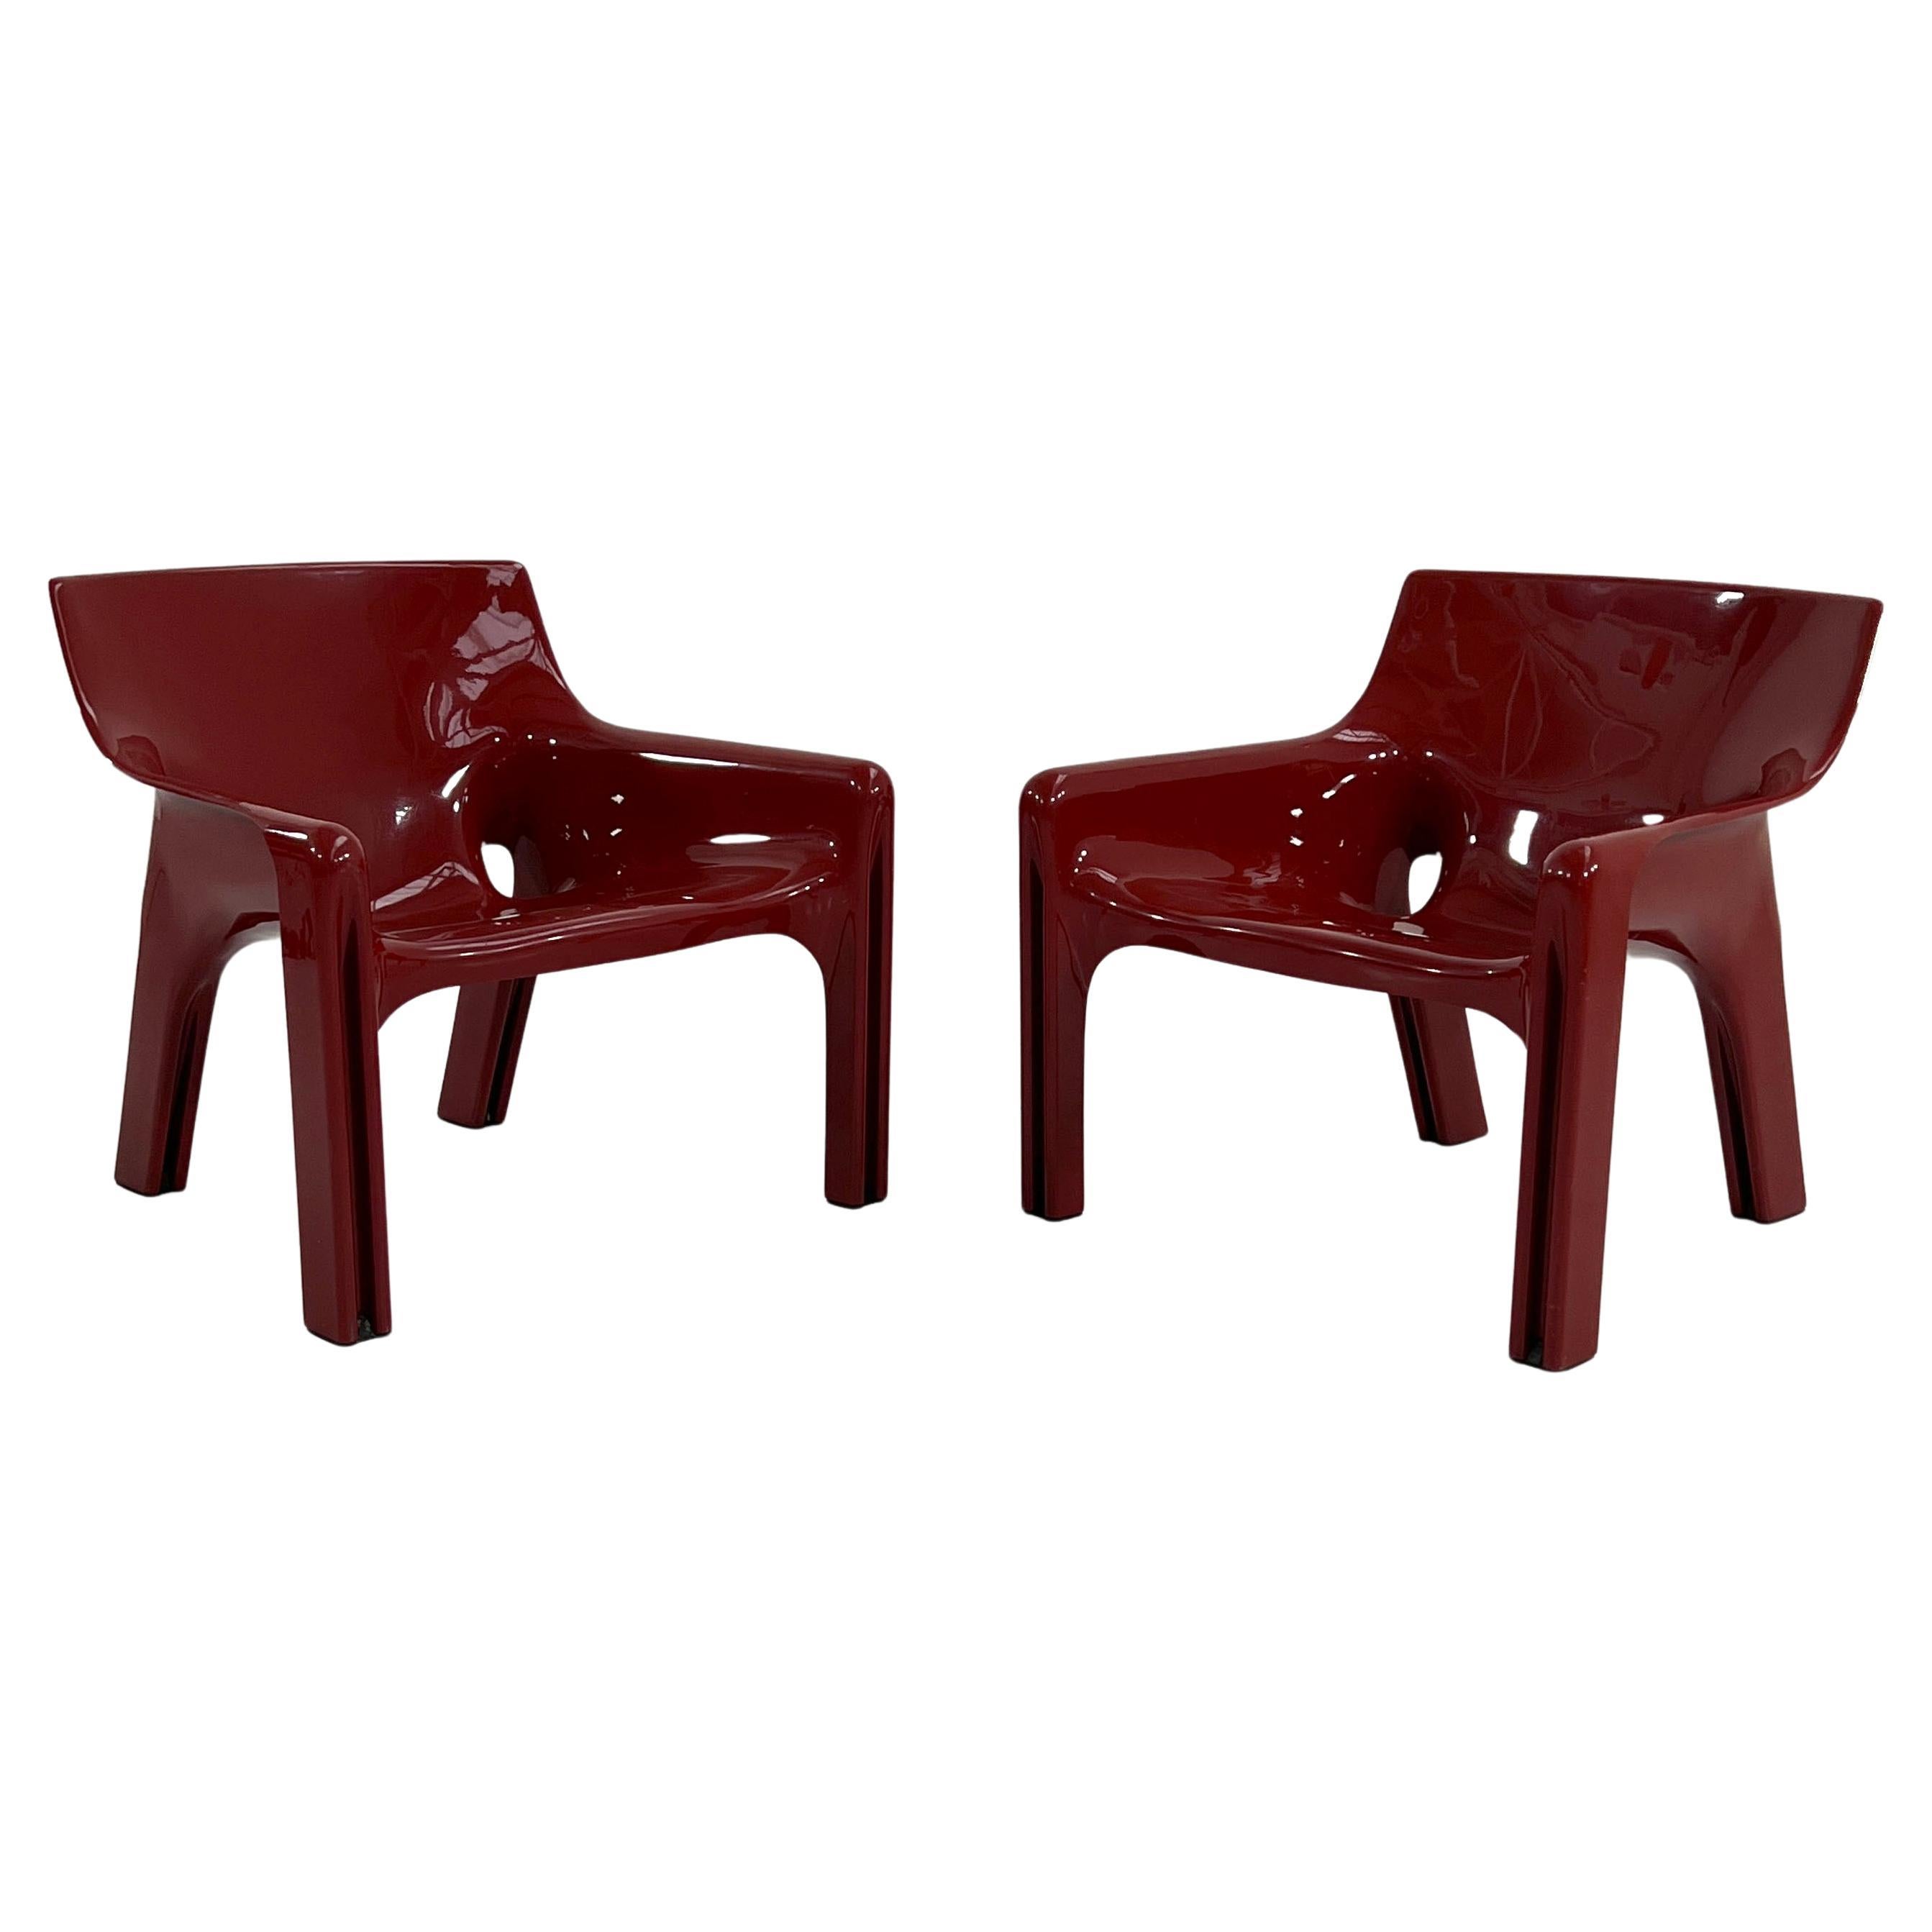 Pair of Burgundy Vicario Lounge Chair by Vico Magistretti for Artemide, 1970s